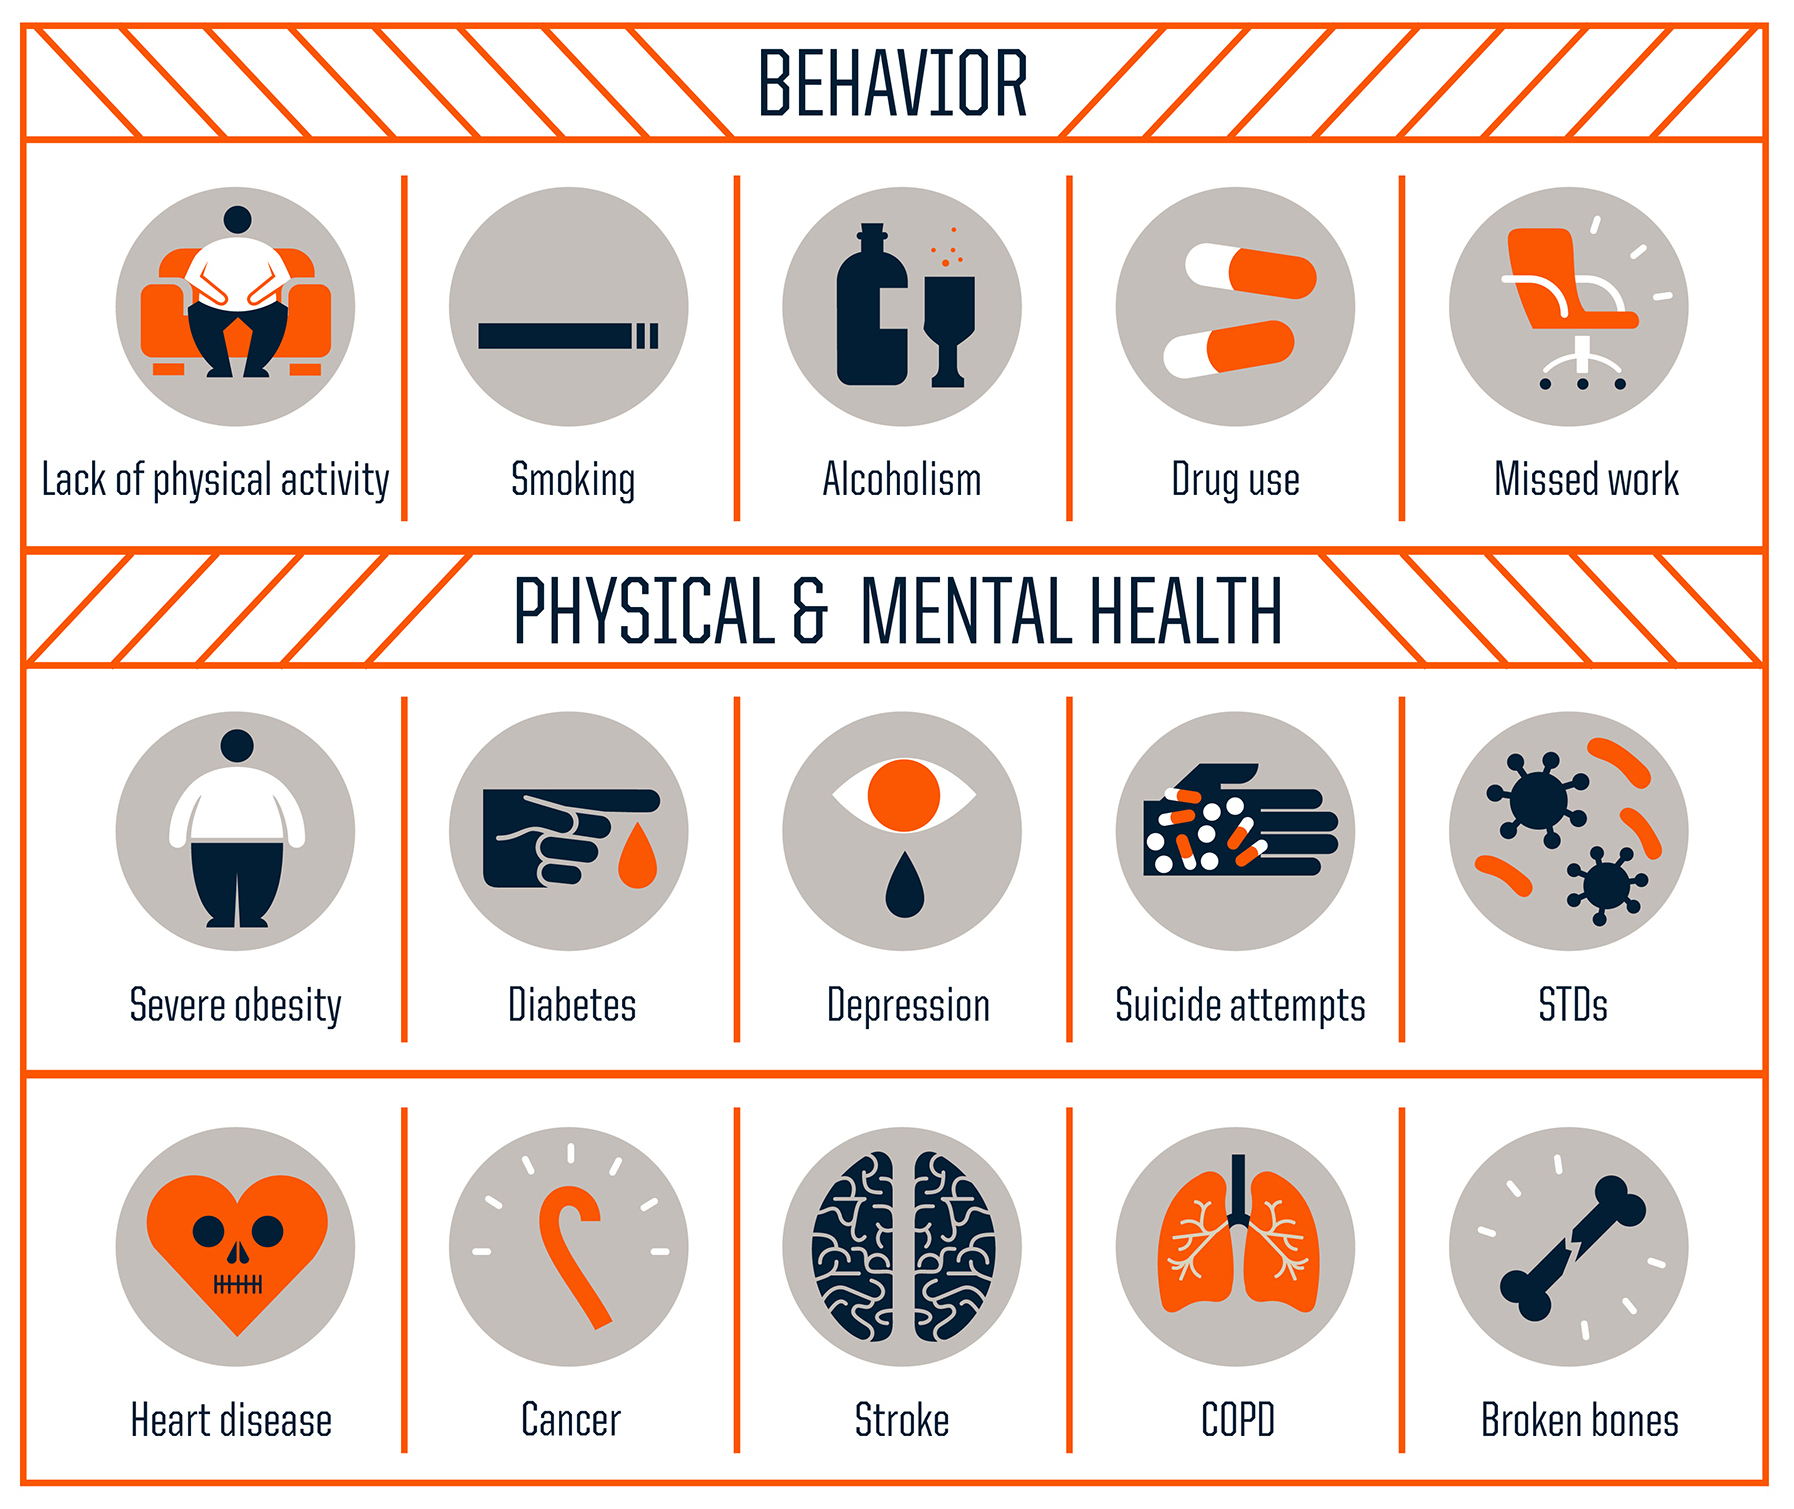 Text with icons representing each item. Behavior: Lack of physical activity, smoking, alcoholism, drug use, missing work. Physical and mental health: Obesity, diabetes, depression, suicide attempts, STDs, heart disease, cancer, stroke, COPD, broken bones